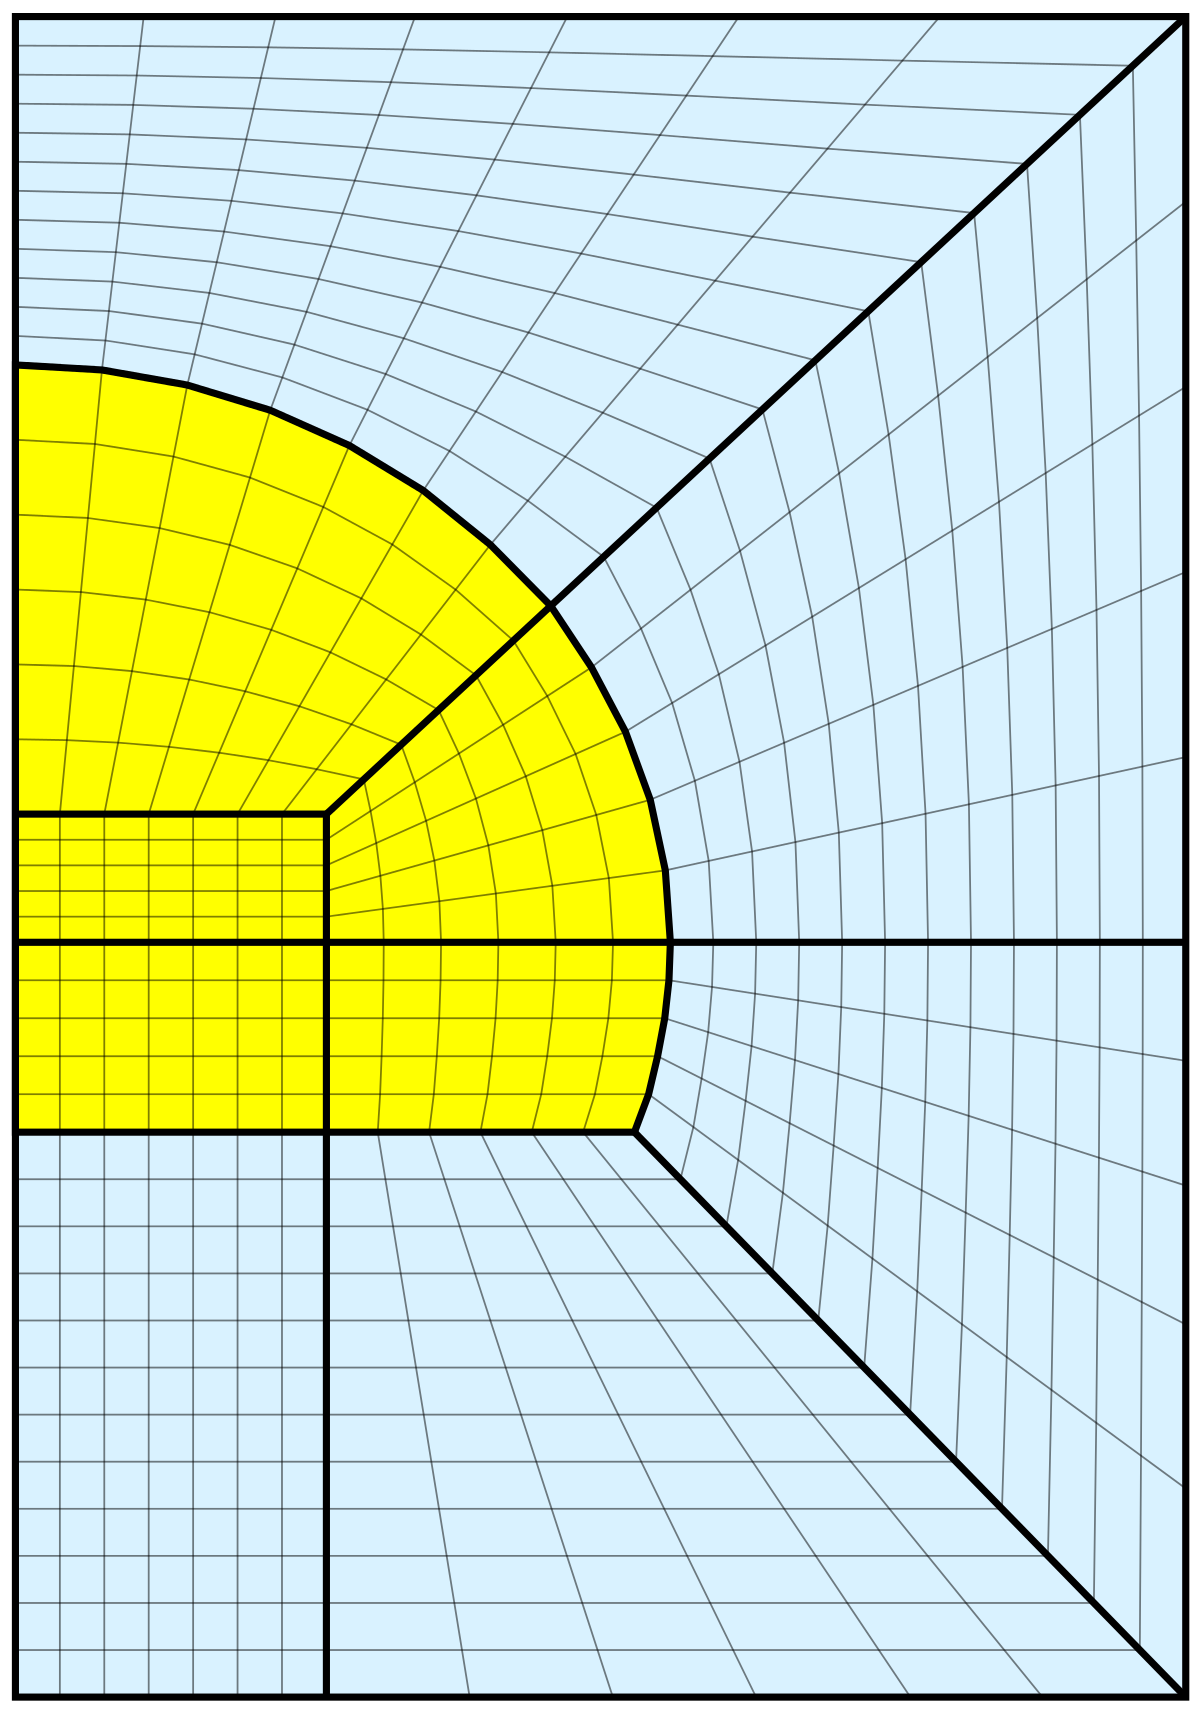 File:Example curvilinear grid.svg — Wikimedia Commons.